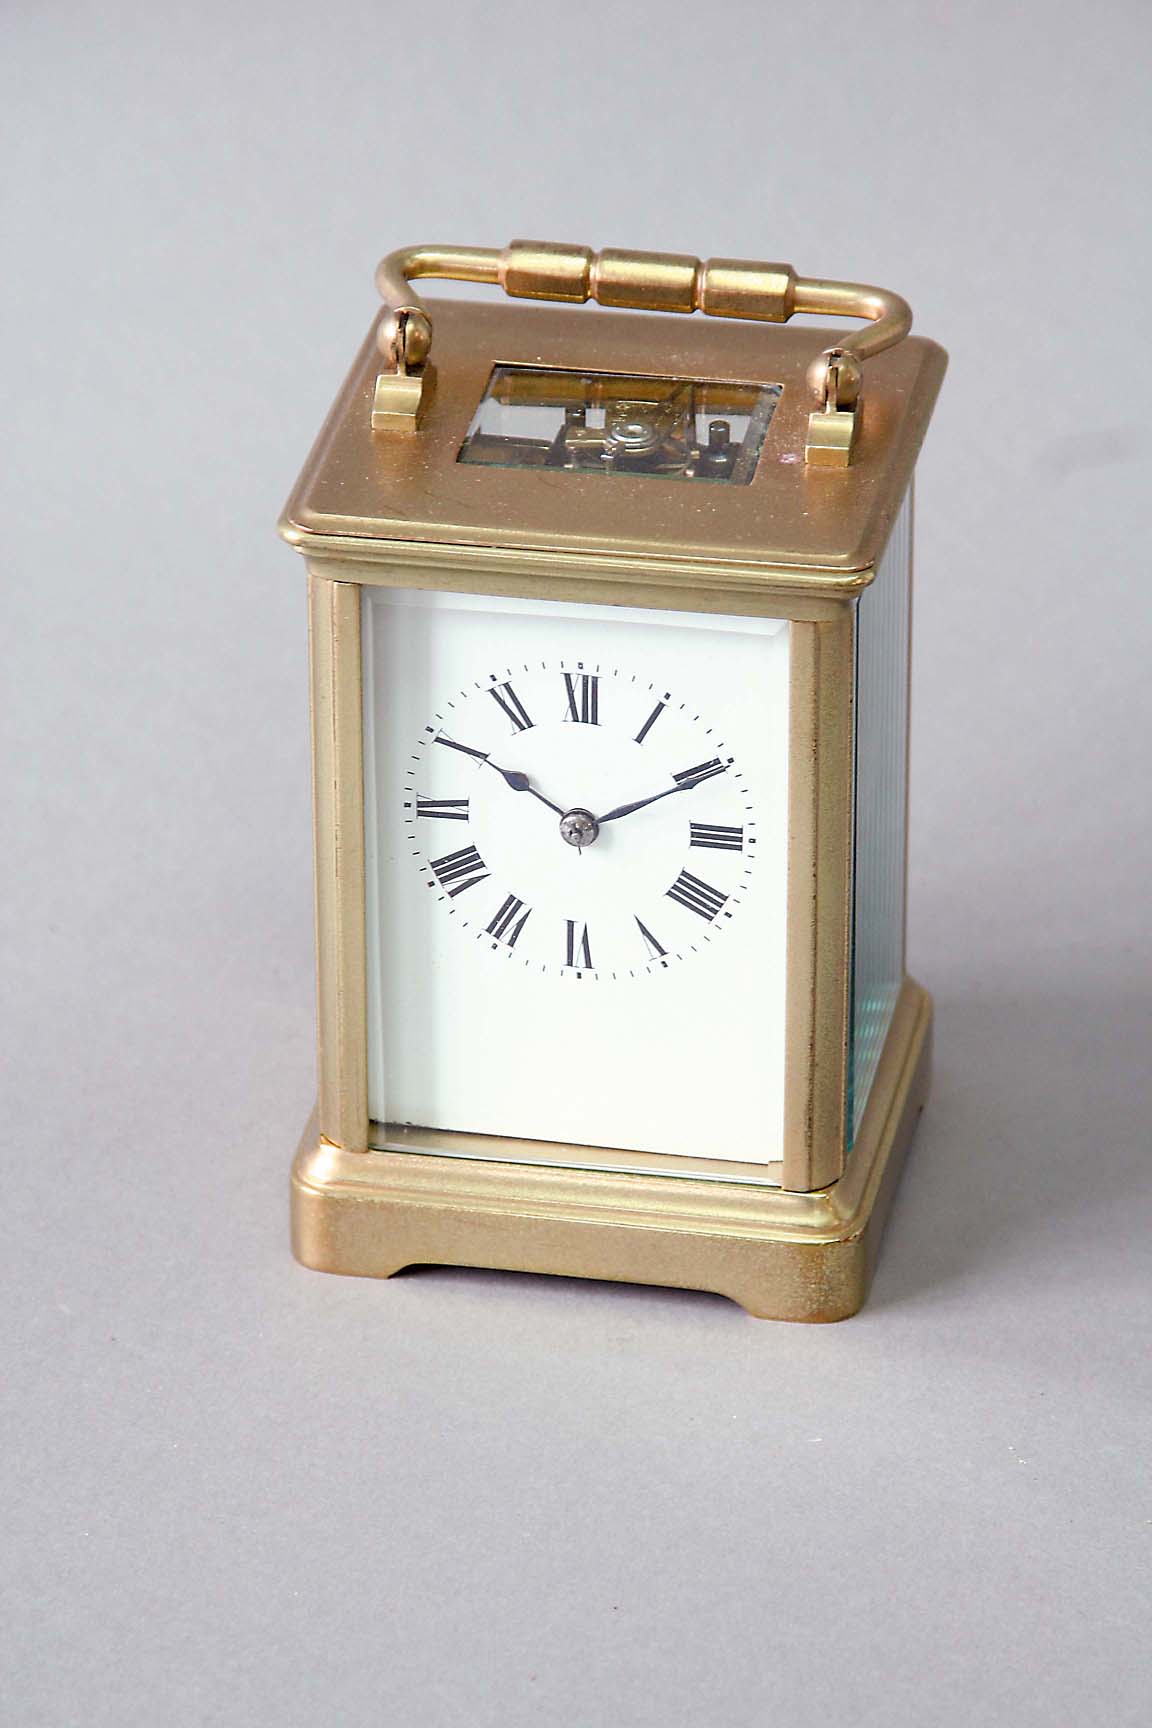 A CARRIAGE CLOCK dial white enamel, movement cylinder escapement striking on a gong, 5ins. (